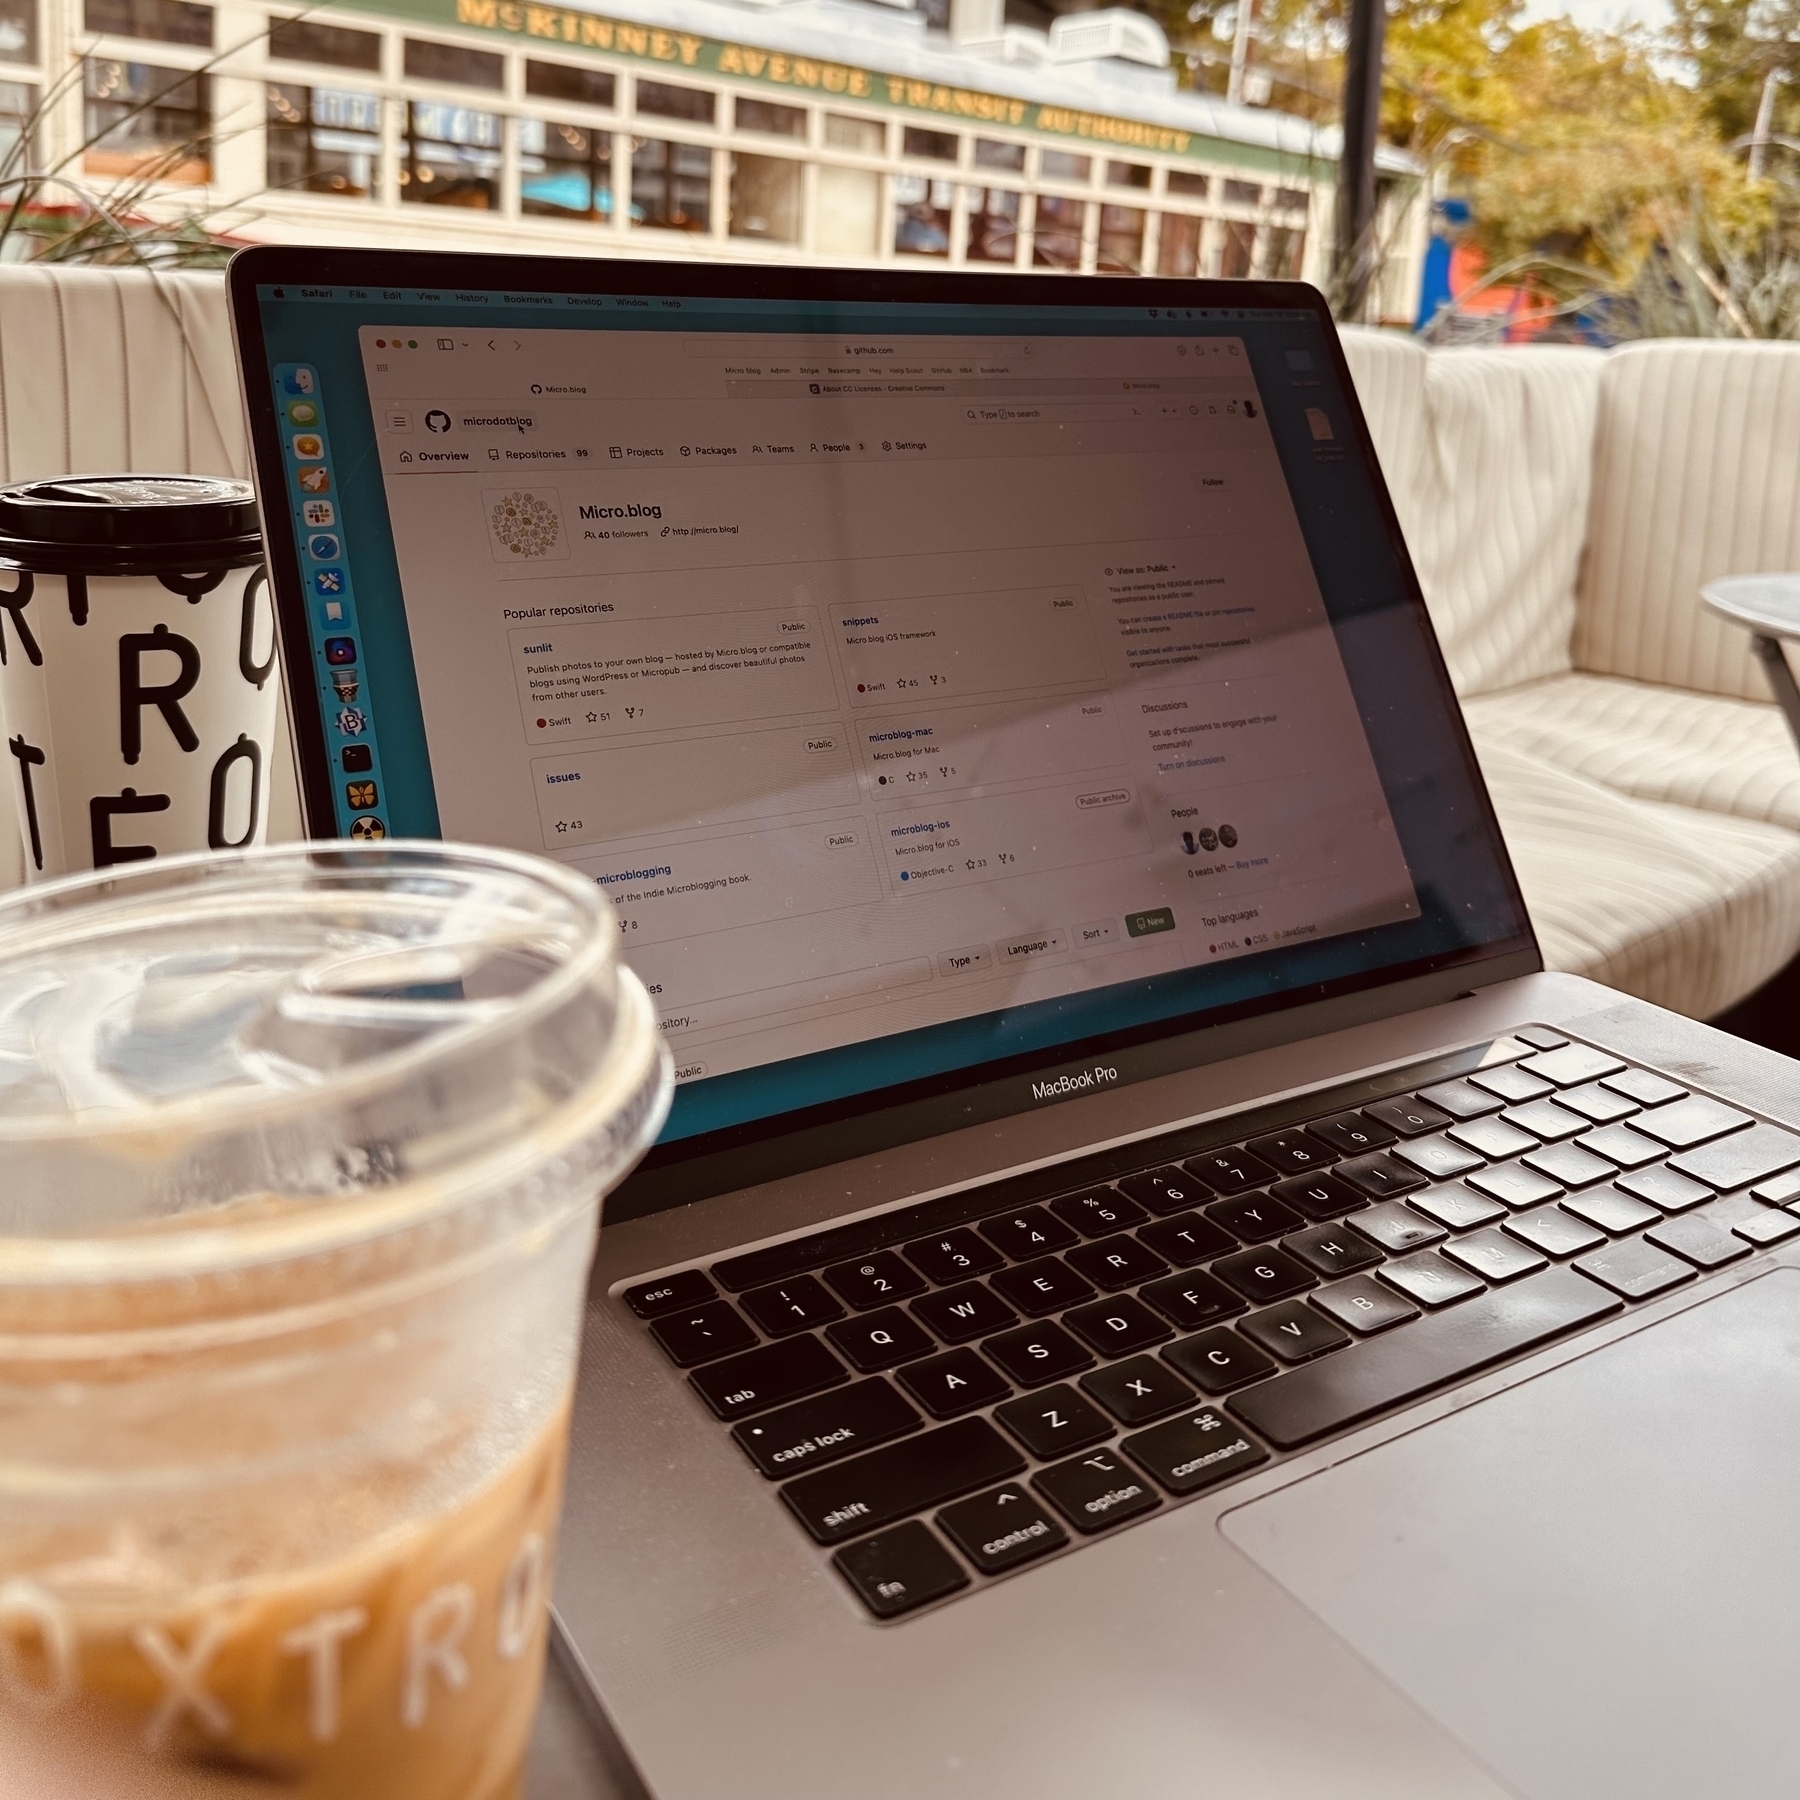 Coffee and laptop outside.